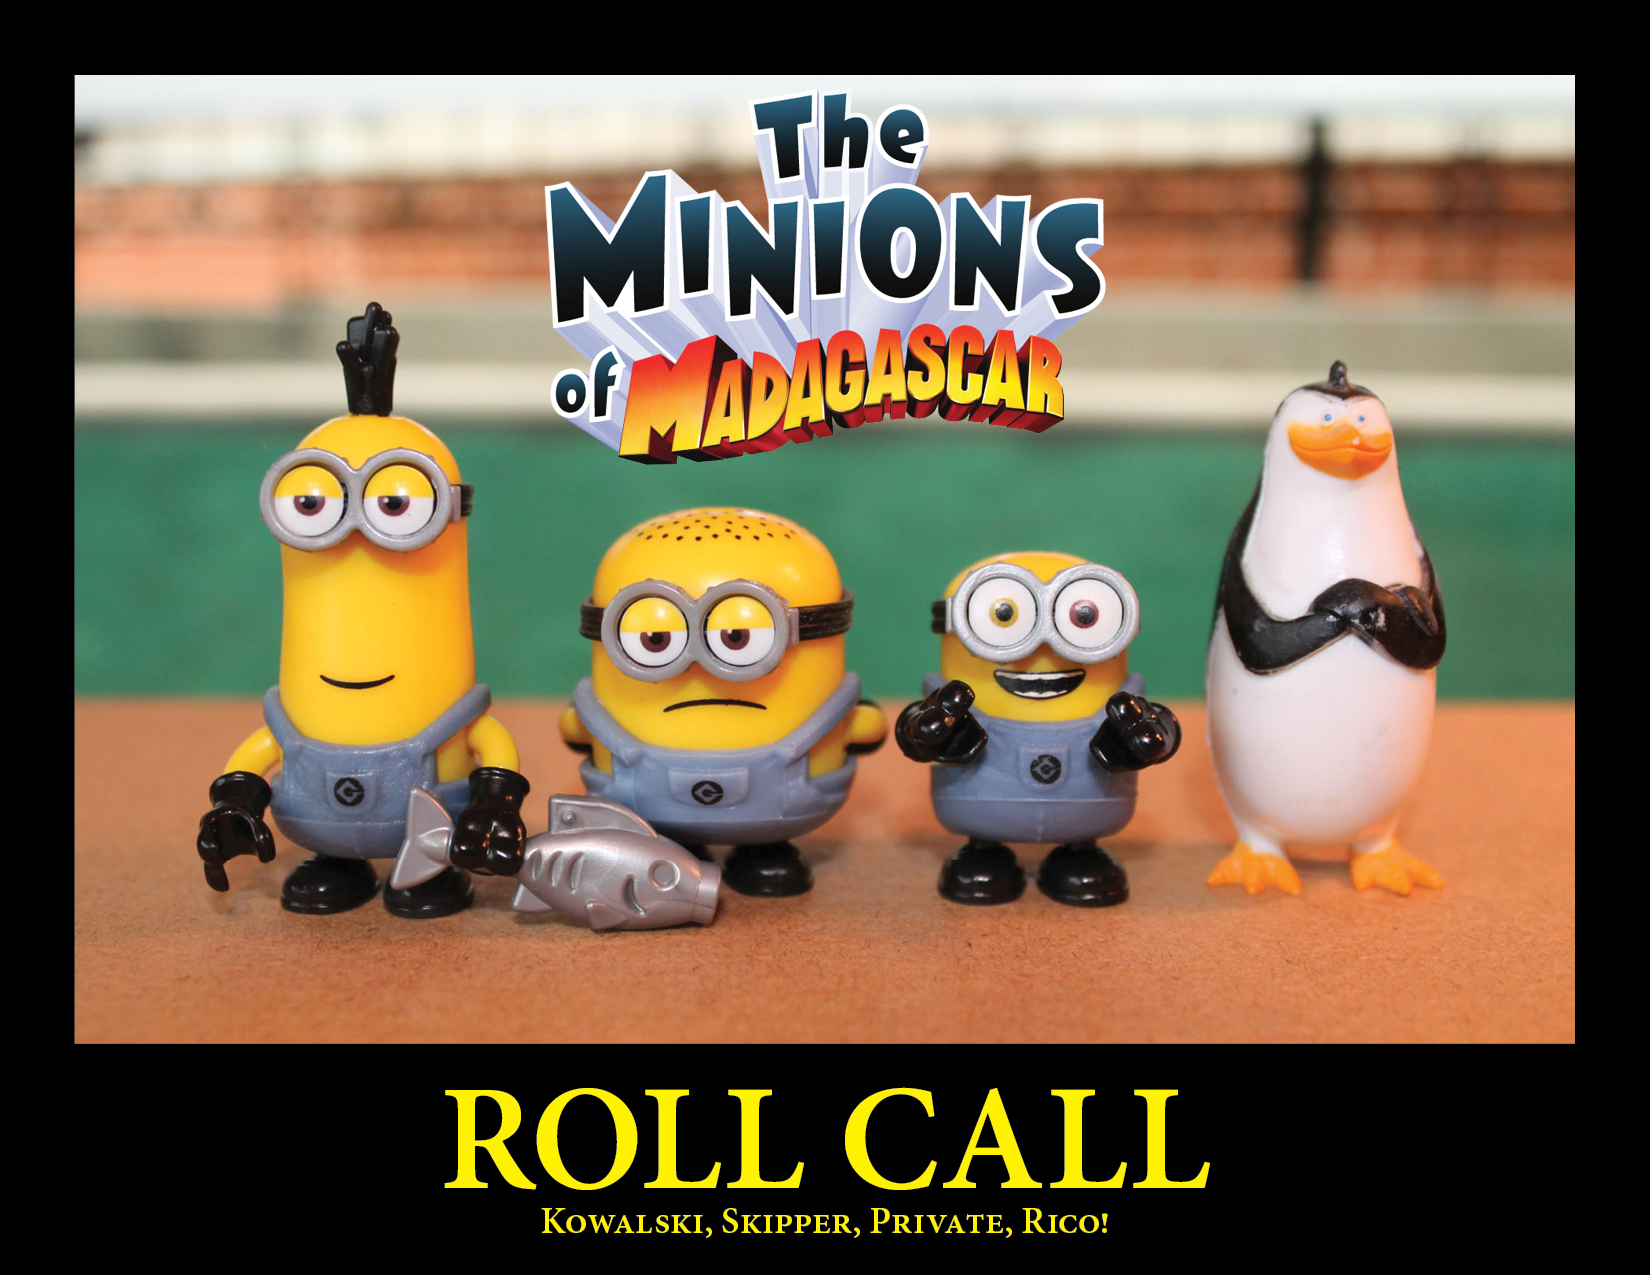 Three minions standing in a line, the first minion holding a fish. At the end of the line is a figure of the penguin Rico and a title of The Minions of Madagascar.